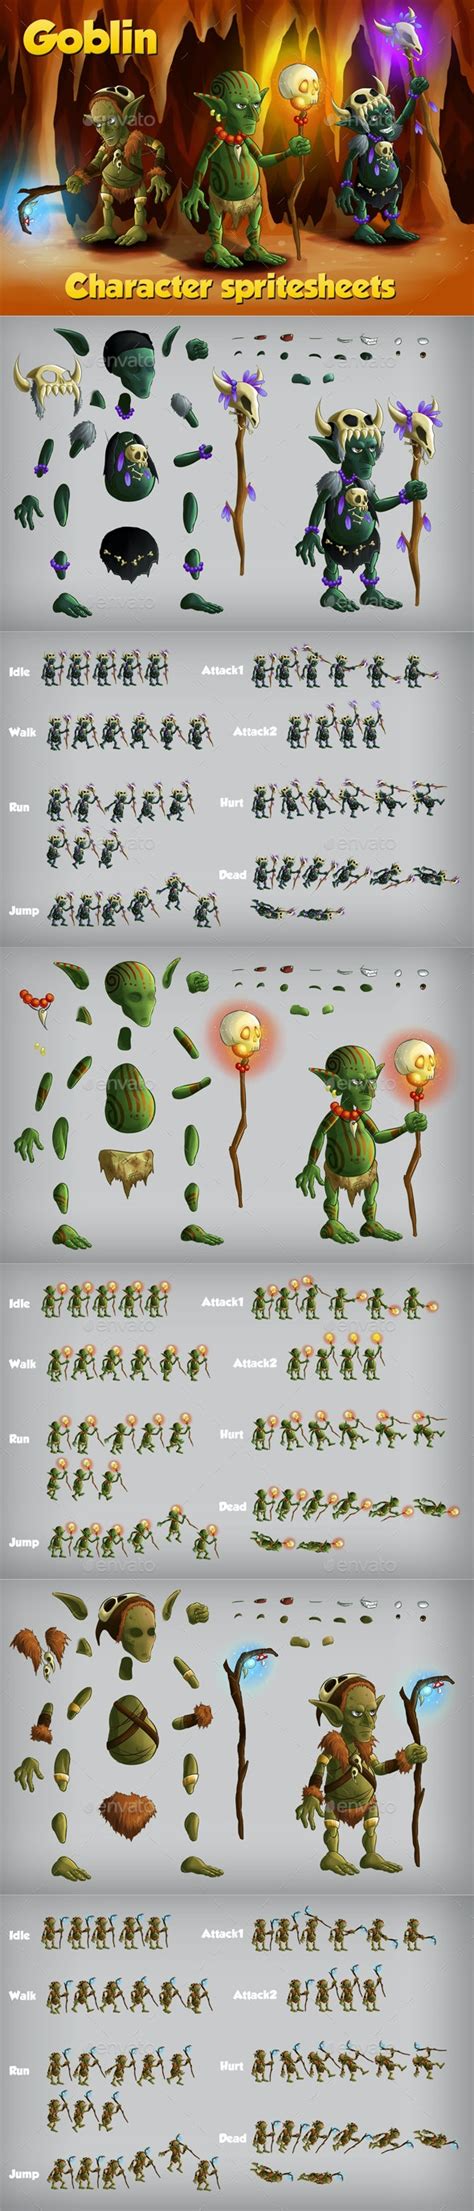 2d Game Goblin Character Sprite By Craftpixnet Graphicriver